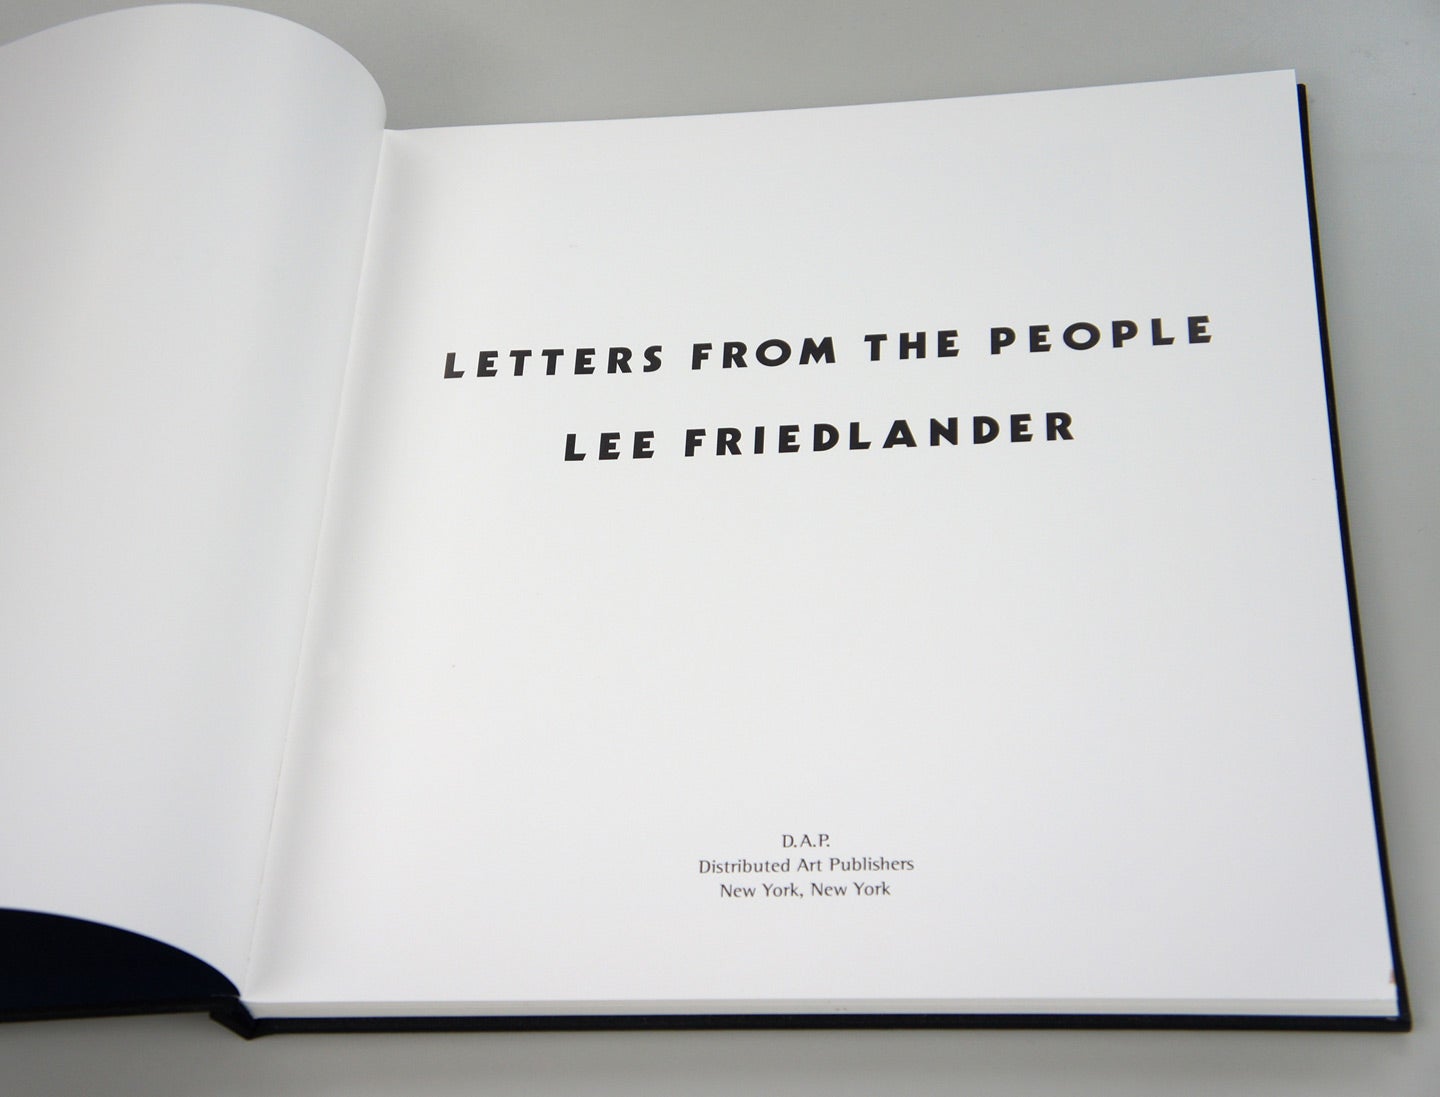 Lee Friedlander: Letters from the People (Special Limited Edition with One Vintage Gelatin Silver Print: "U")